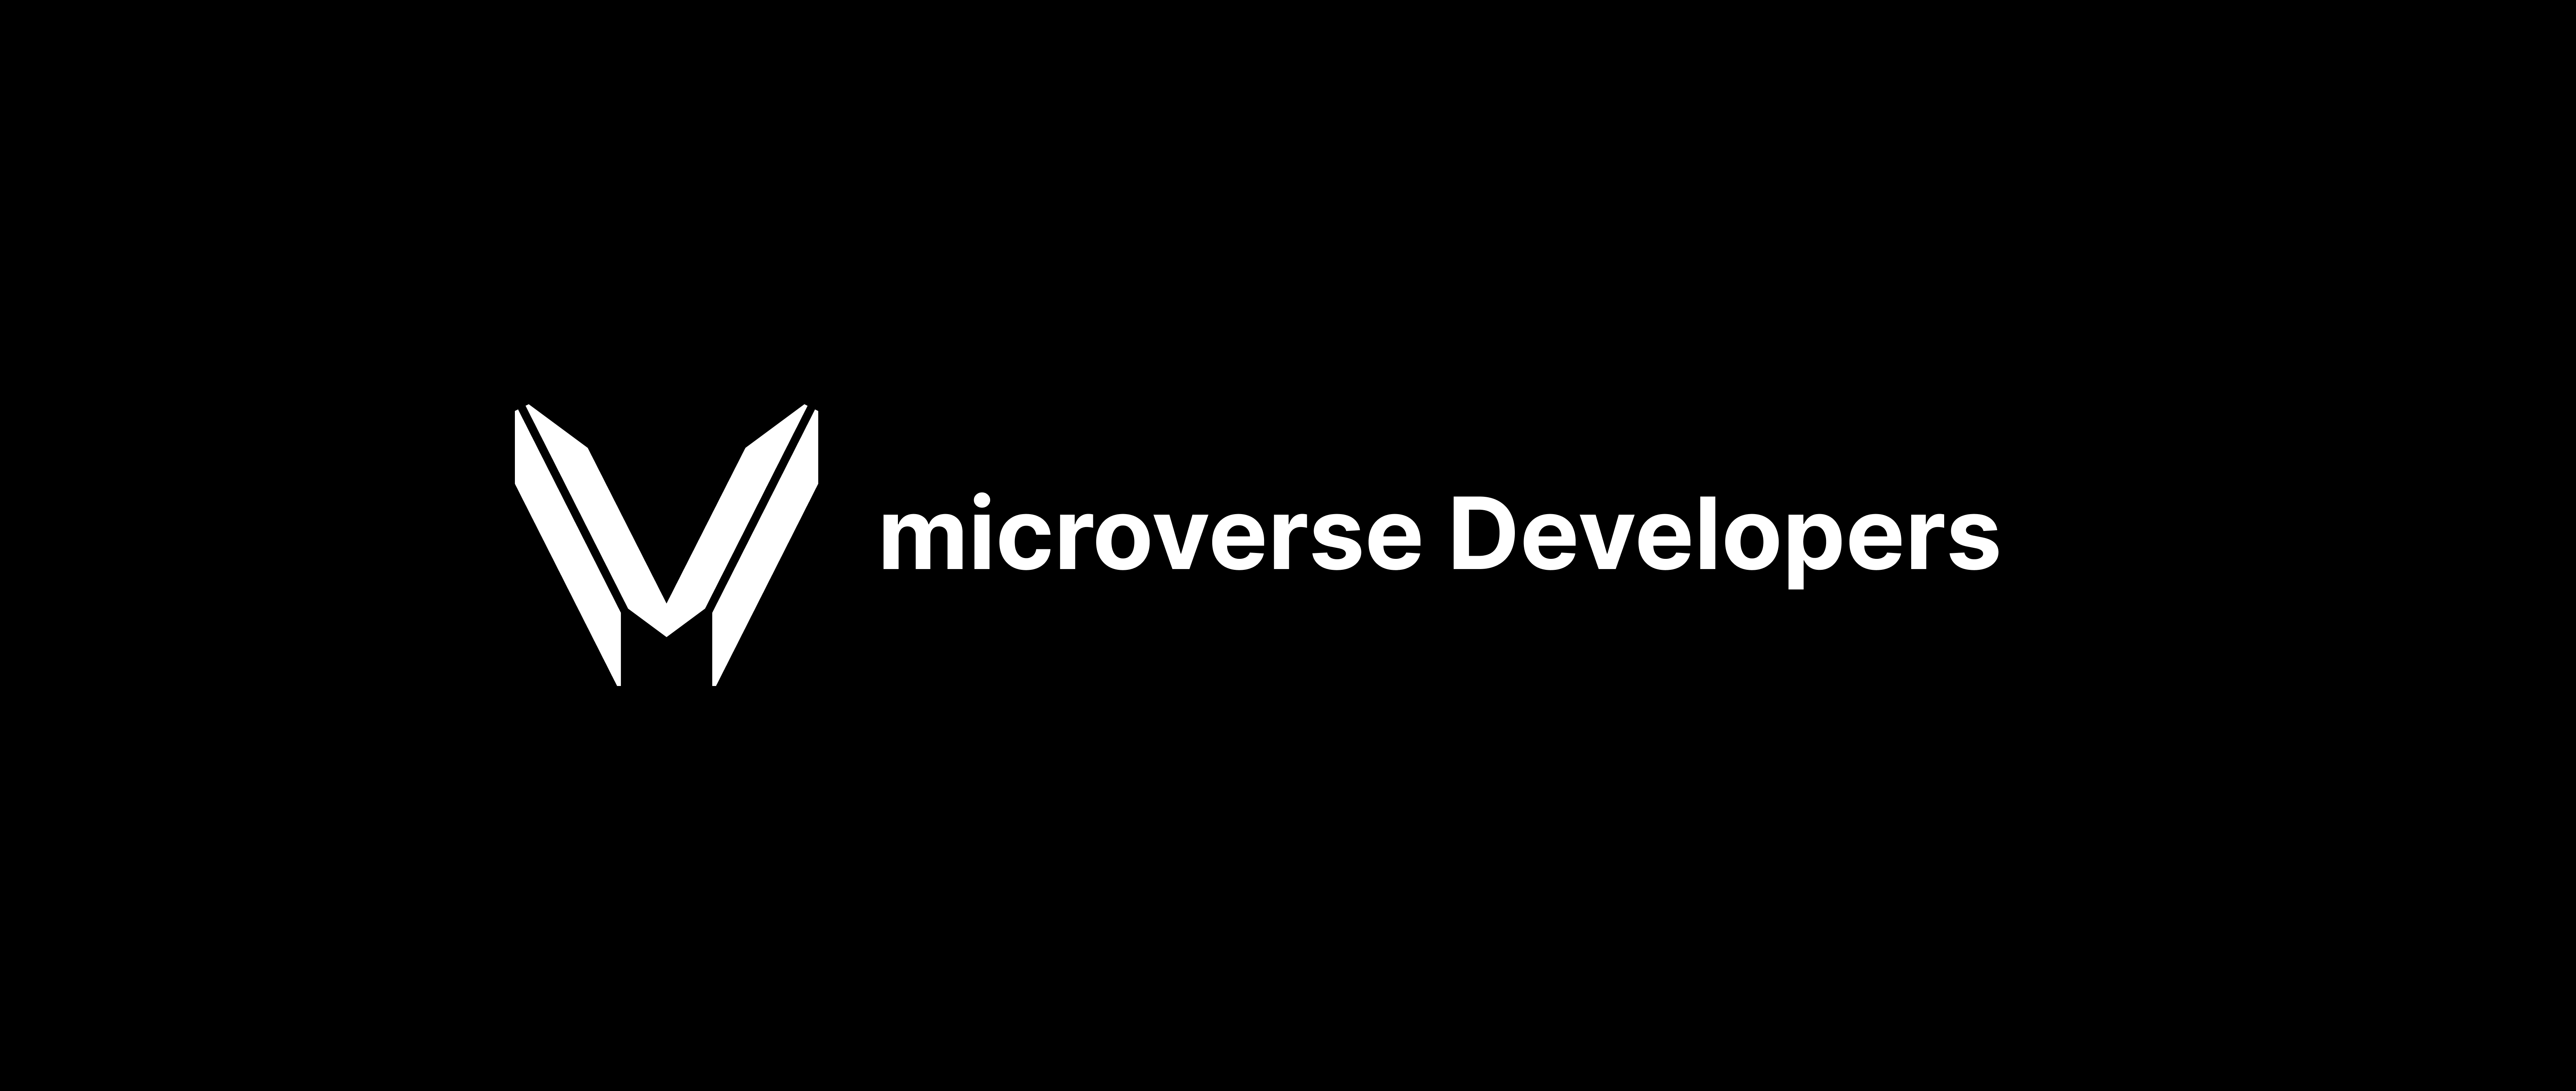 microverse-developers-header.png